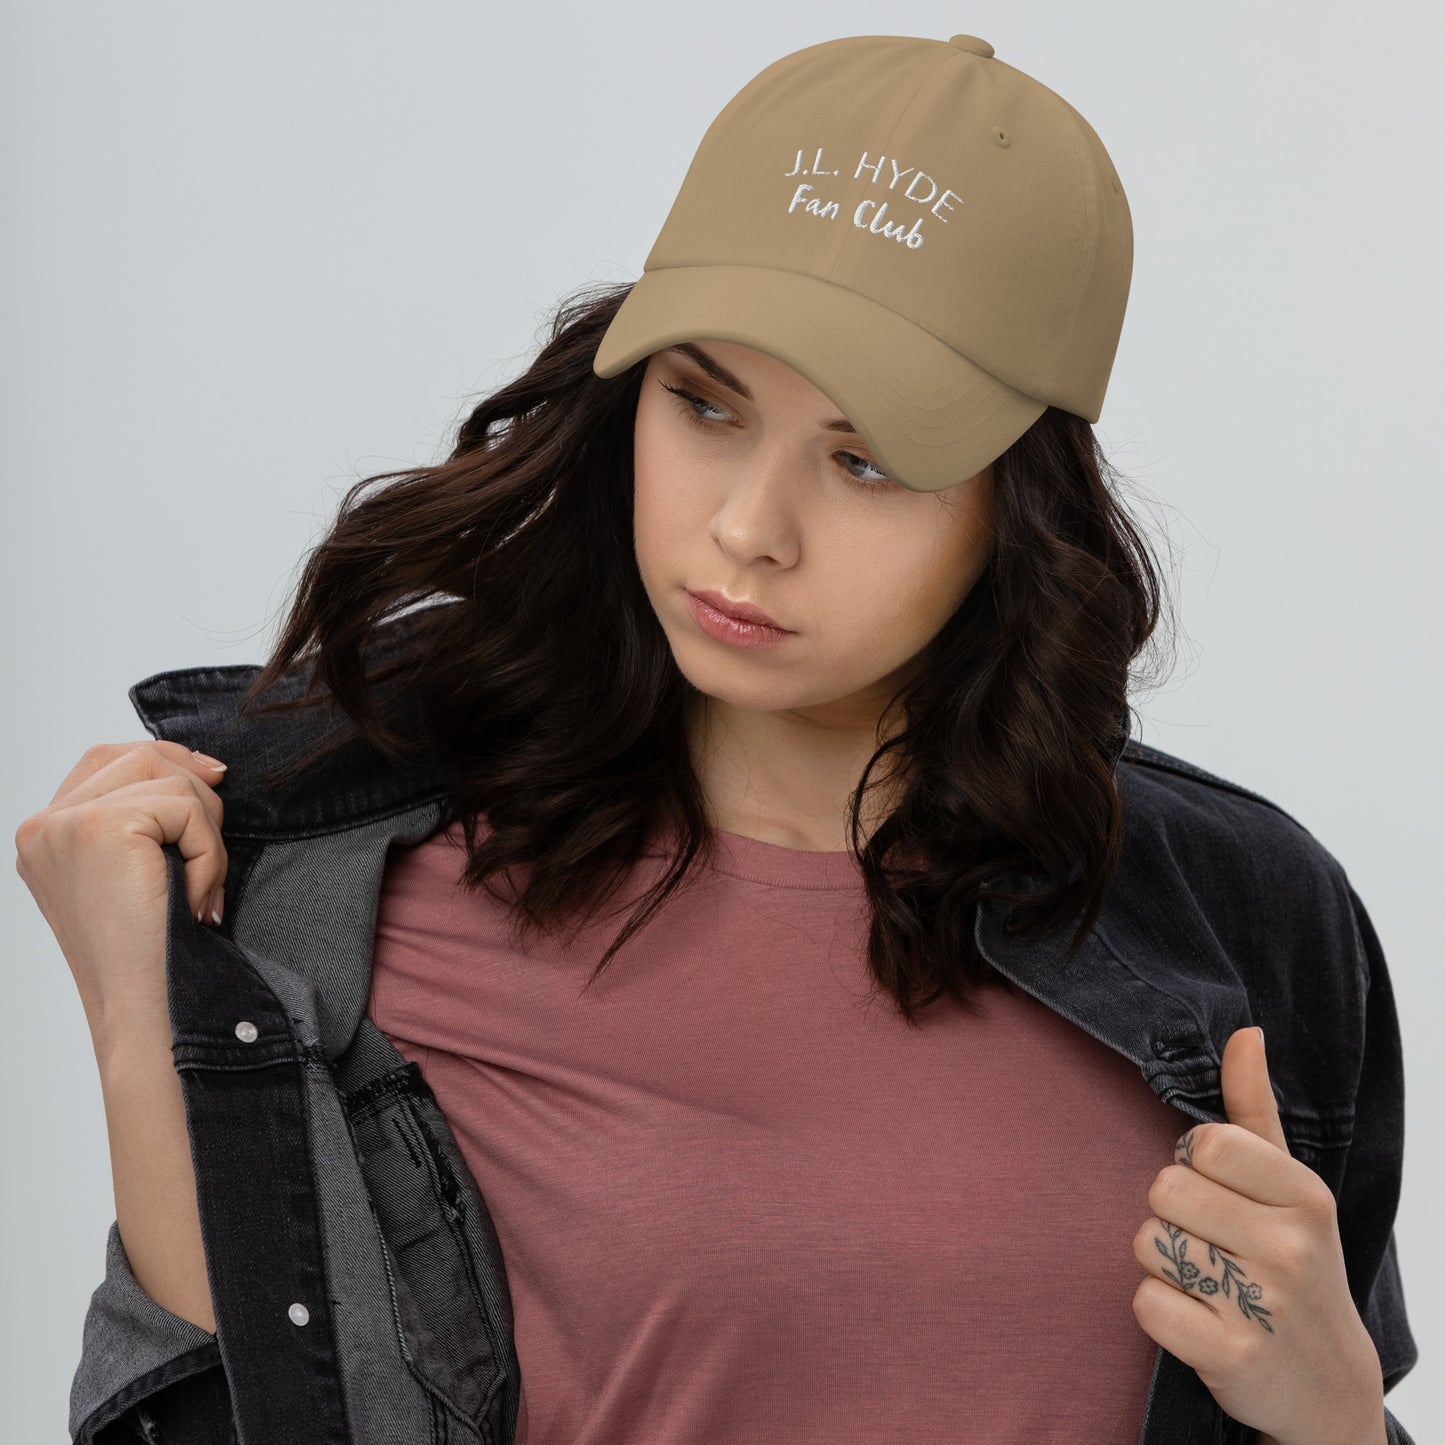 Fan Club Embroidered Dad hat